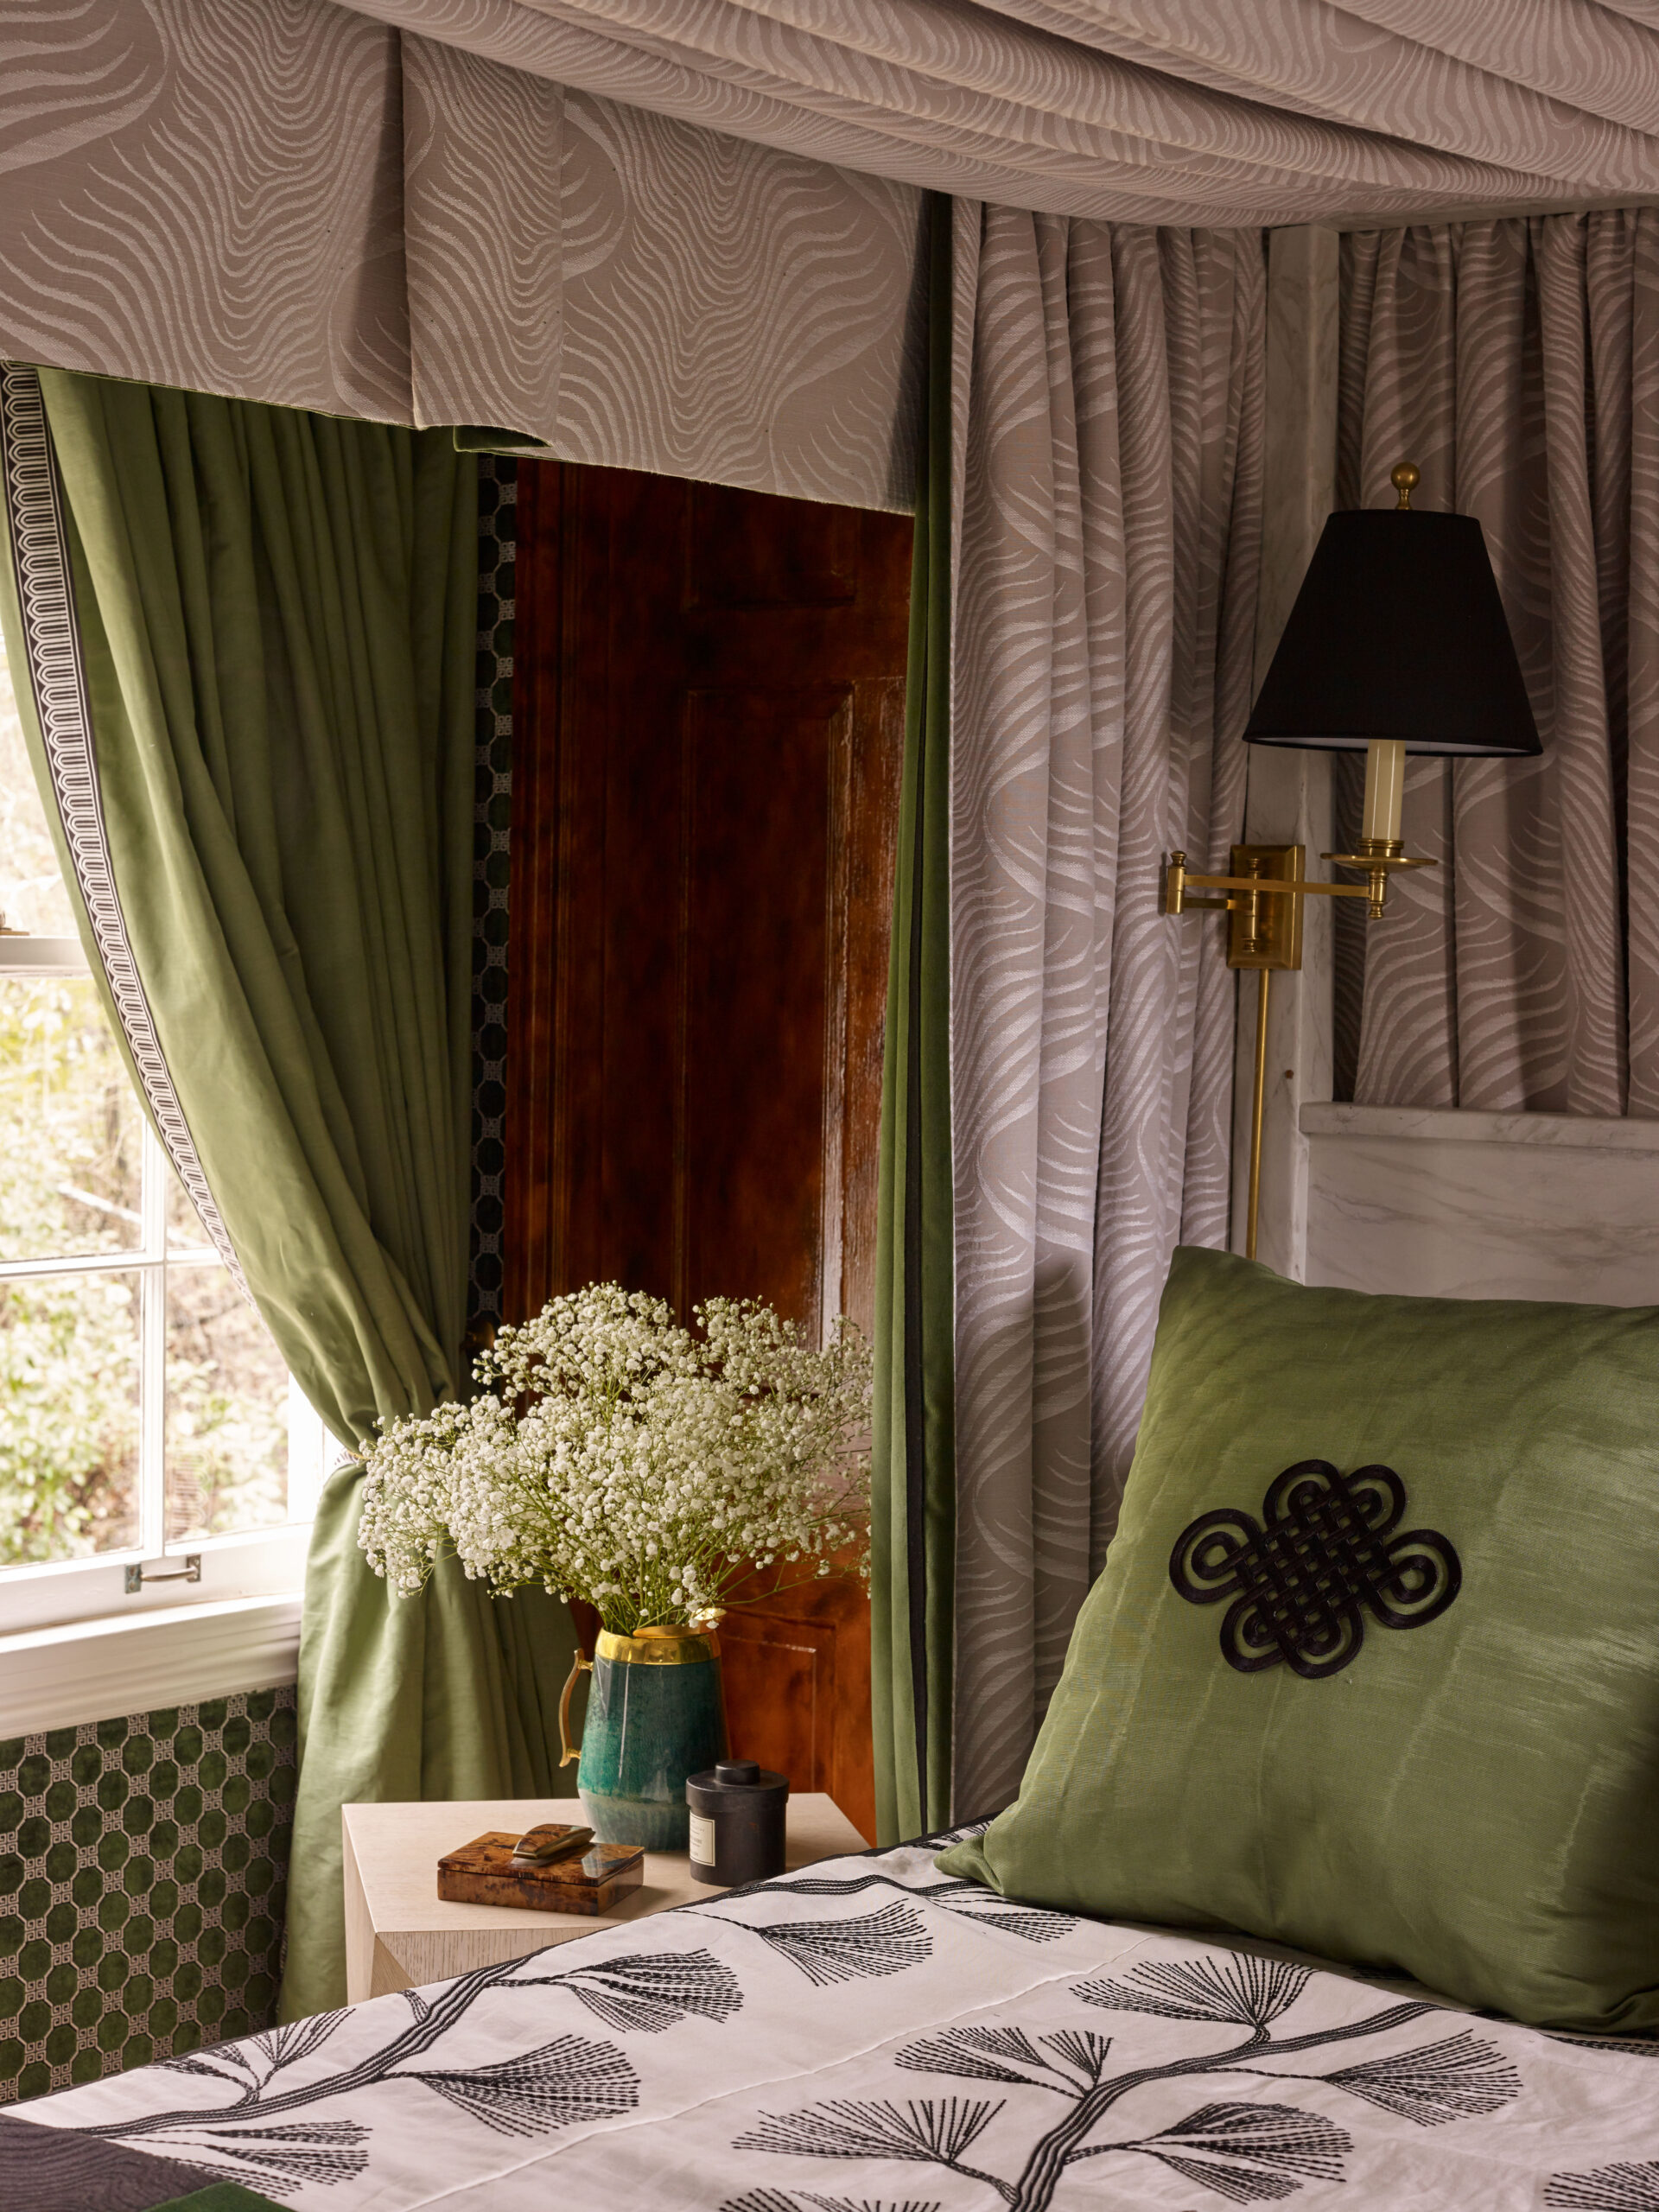 Design by Andrew Brown featuring Schumacher Sauvage fabric